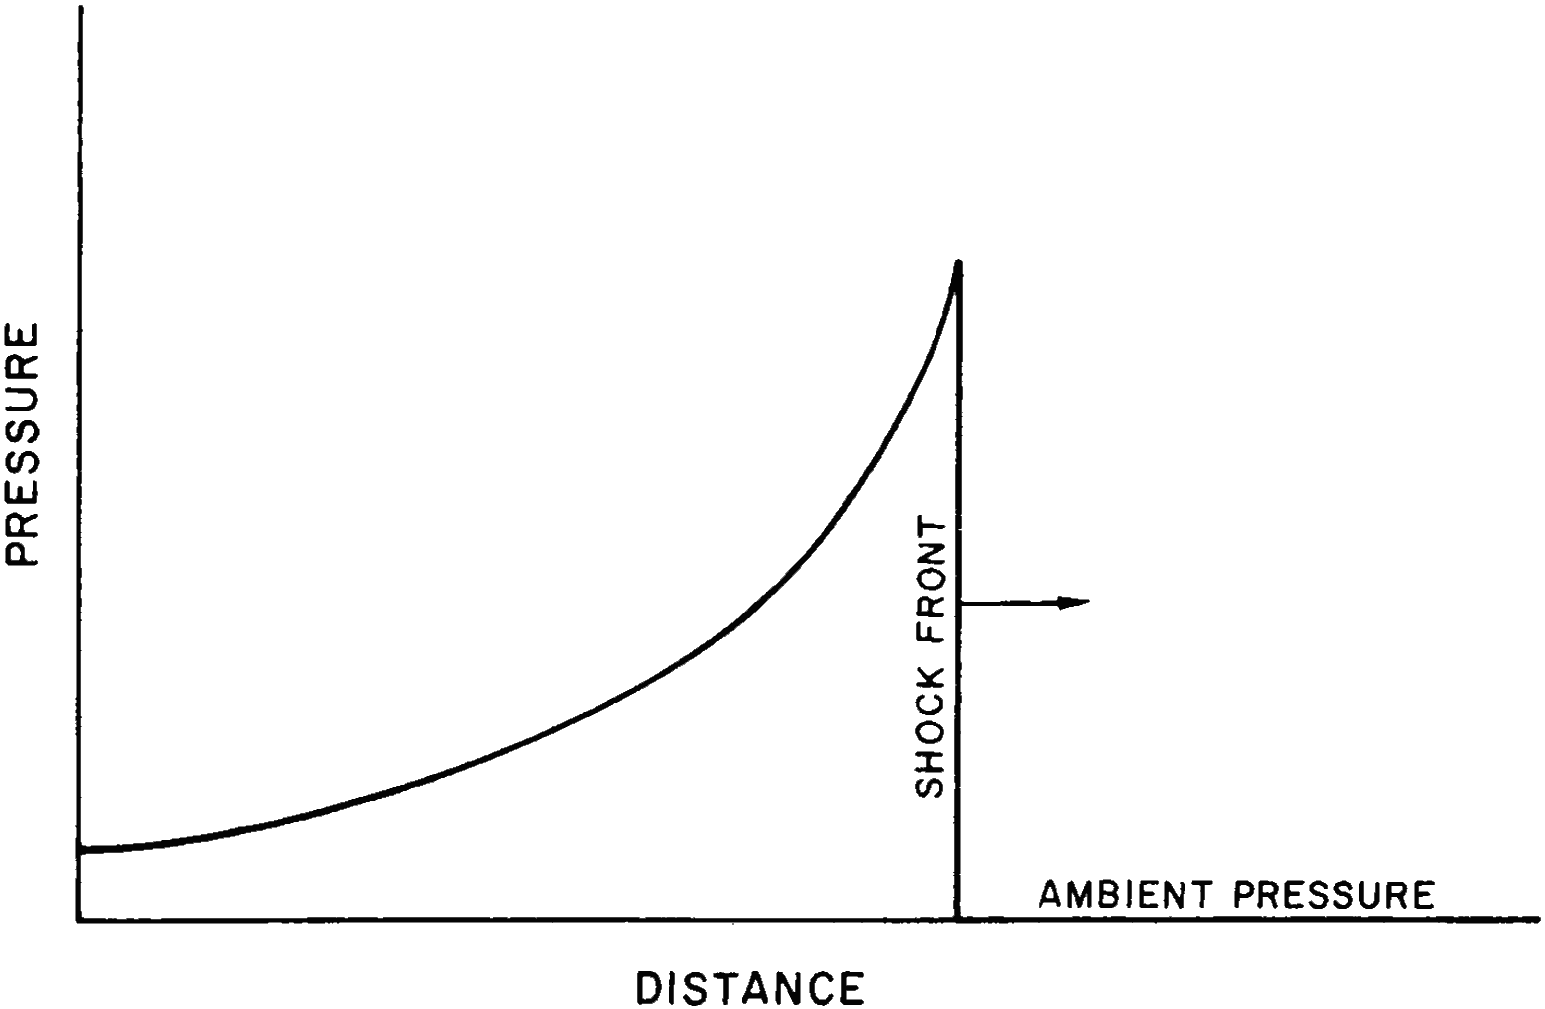 A graph charting Pressure (the Y axis) as compared to Distance (the X axis). There are no unit markers on either axis. A line curves upward at an accelerating rate until it abruptly stops and drops vertically to the X axis. An arrow rooted in the vertical line points forward along the X axis. The vertical line is labeled “shock front.” Beyond the vertical line along the X axis is labeled “ambient pressure.”